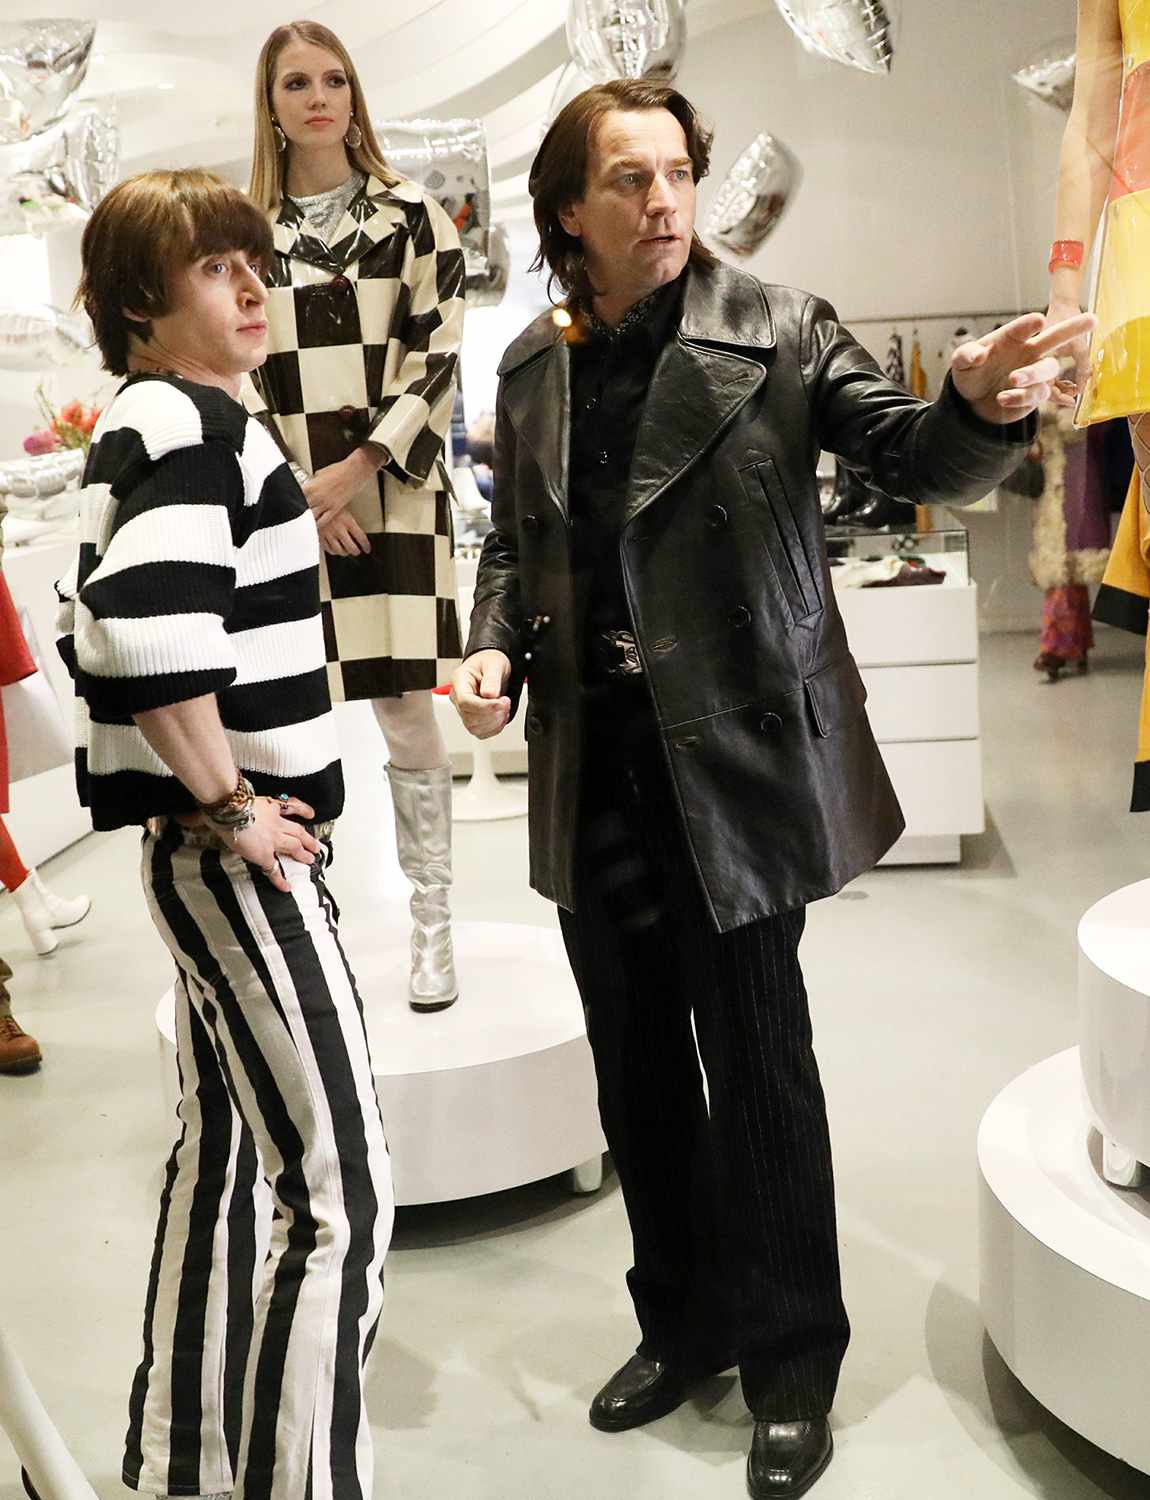 Ewan McGregor, as Roy Halston and Rory Culkin, as Joel Shumacher filming a scene inside a clothing store at the Netflix series "Halston" set in the meatpacking District, Manhattan